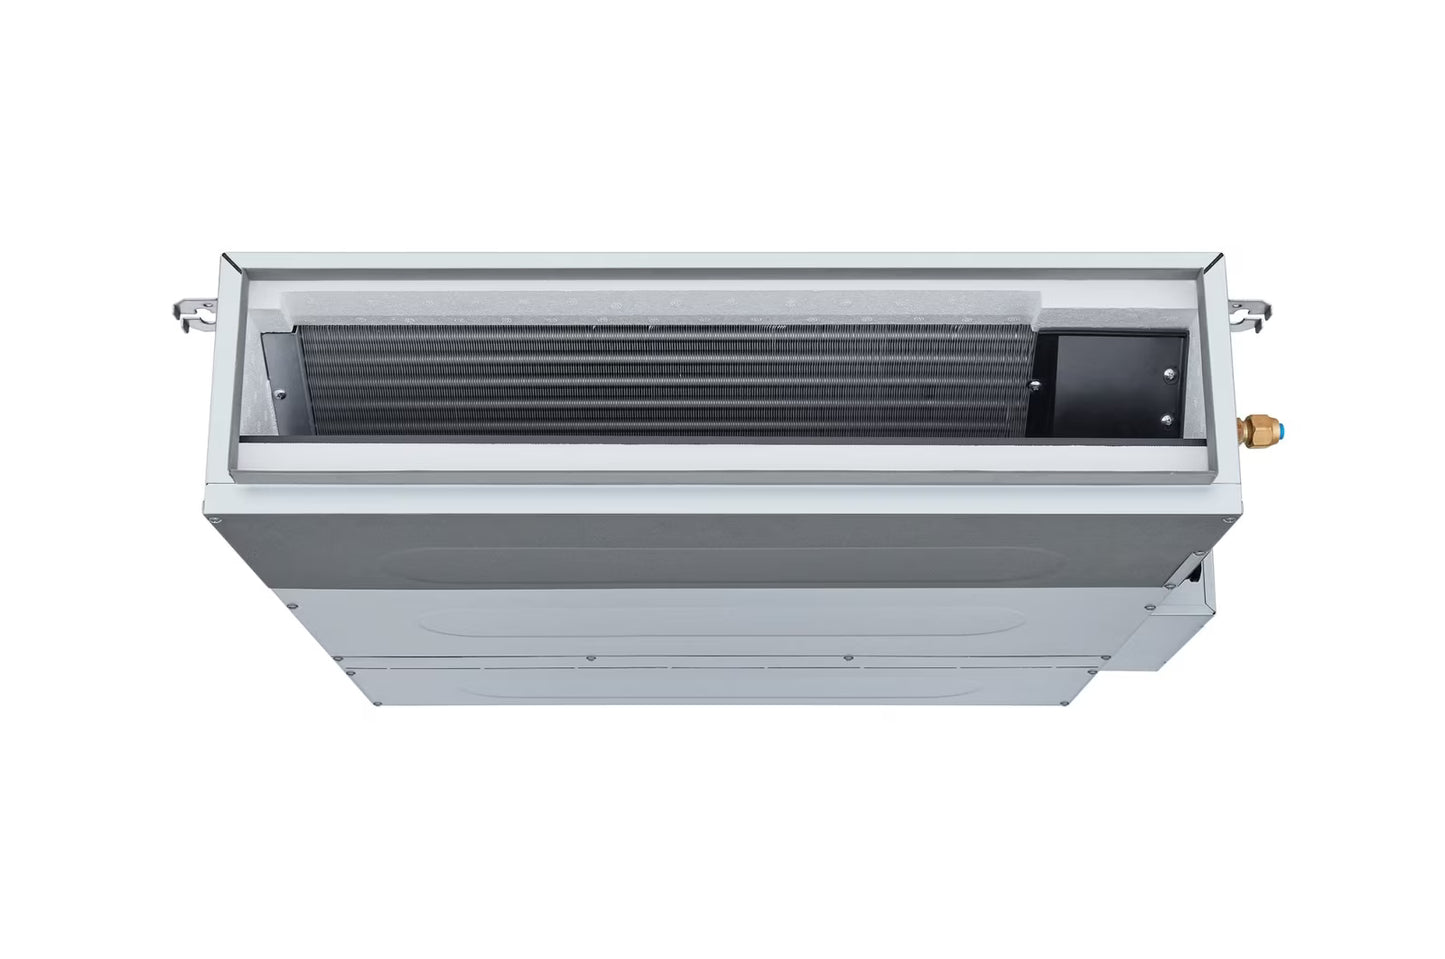 LG Ceiling Concealed Duct Unit 6.0KW with Low Static and E.S.P. Control for Multiple Rooms - ARNU21GL3G4